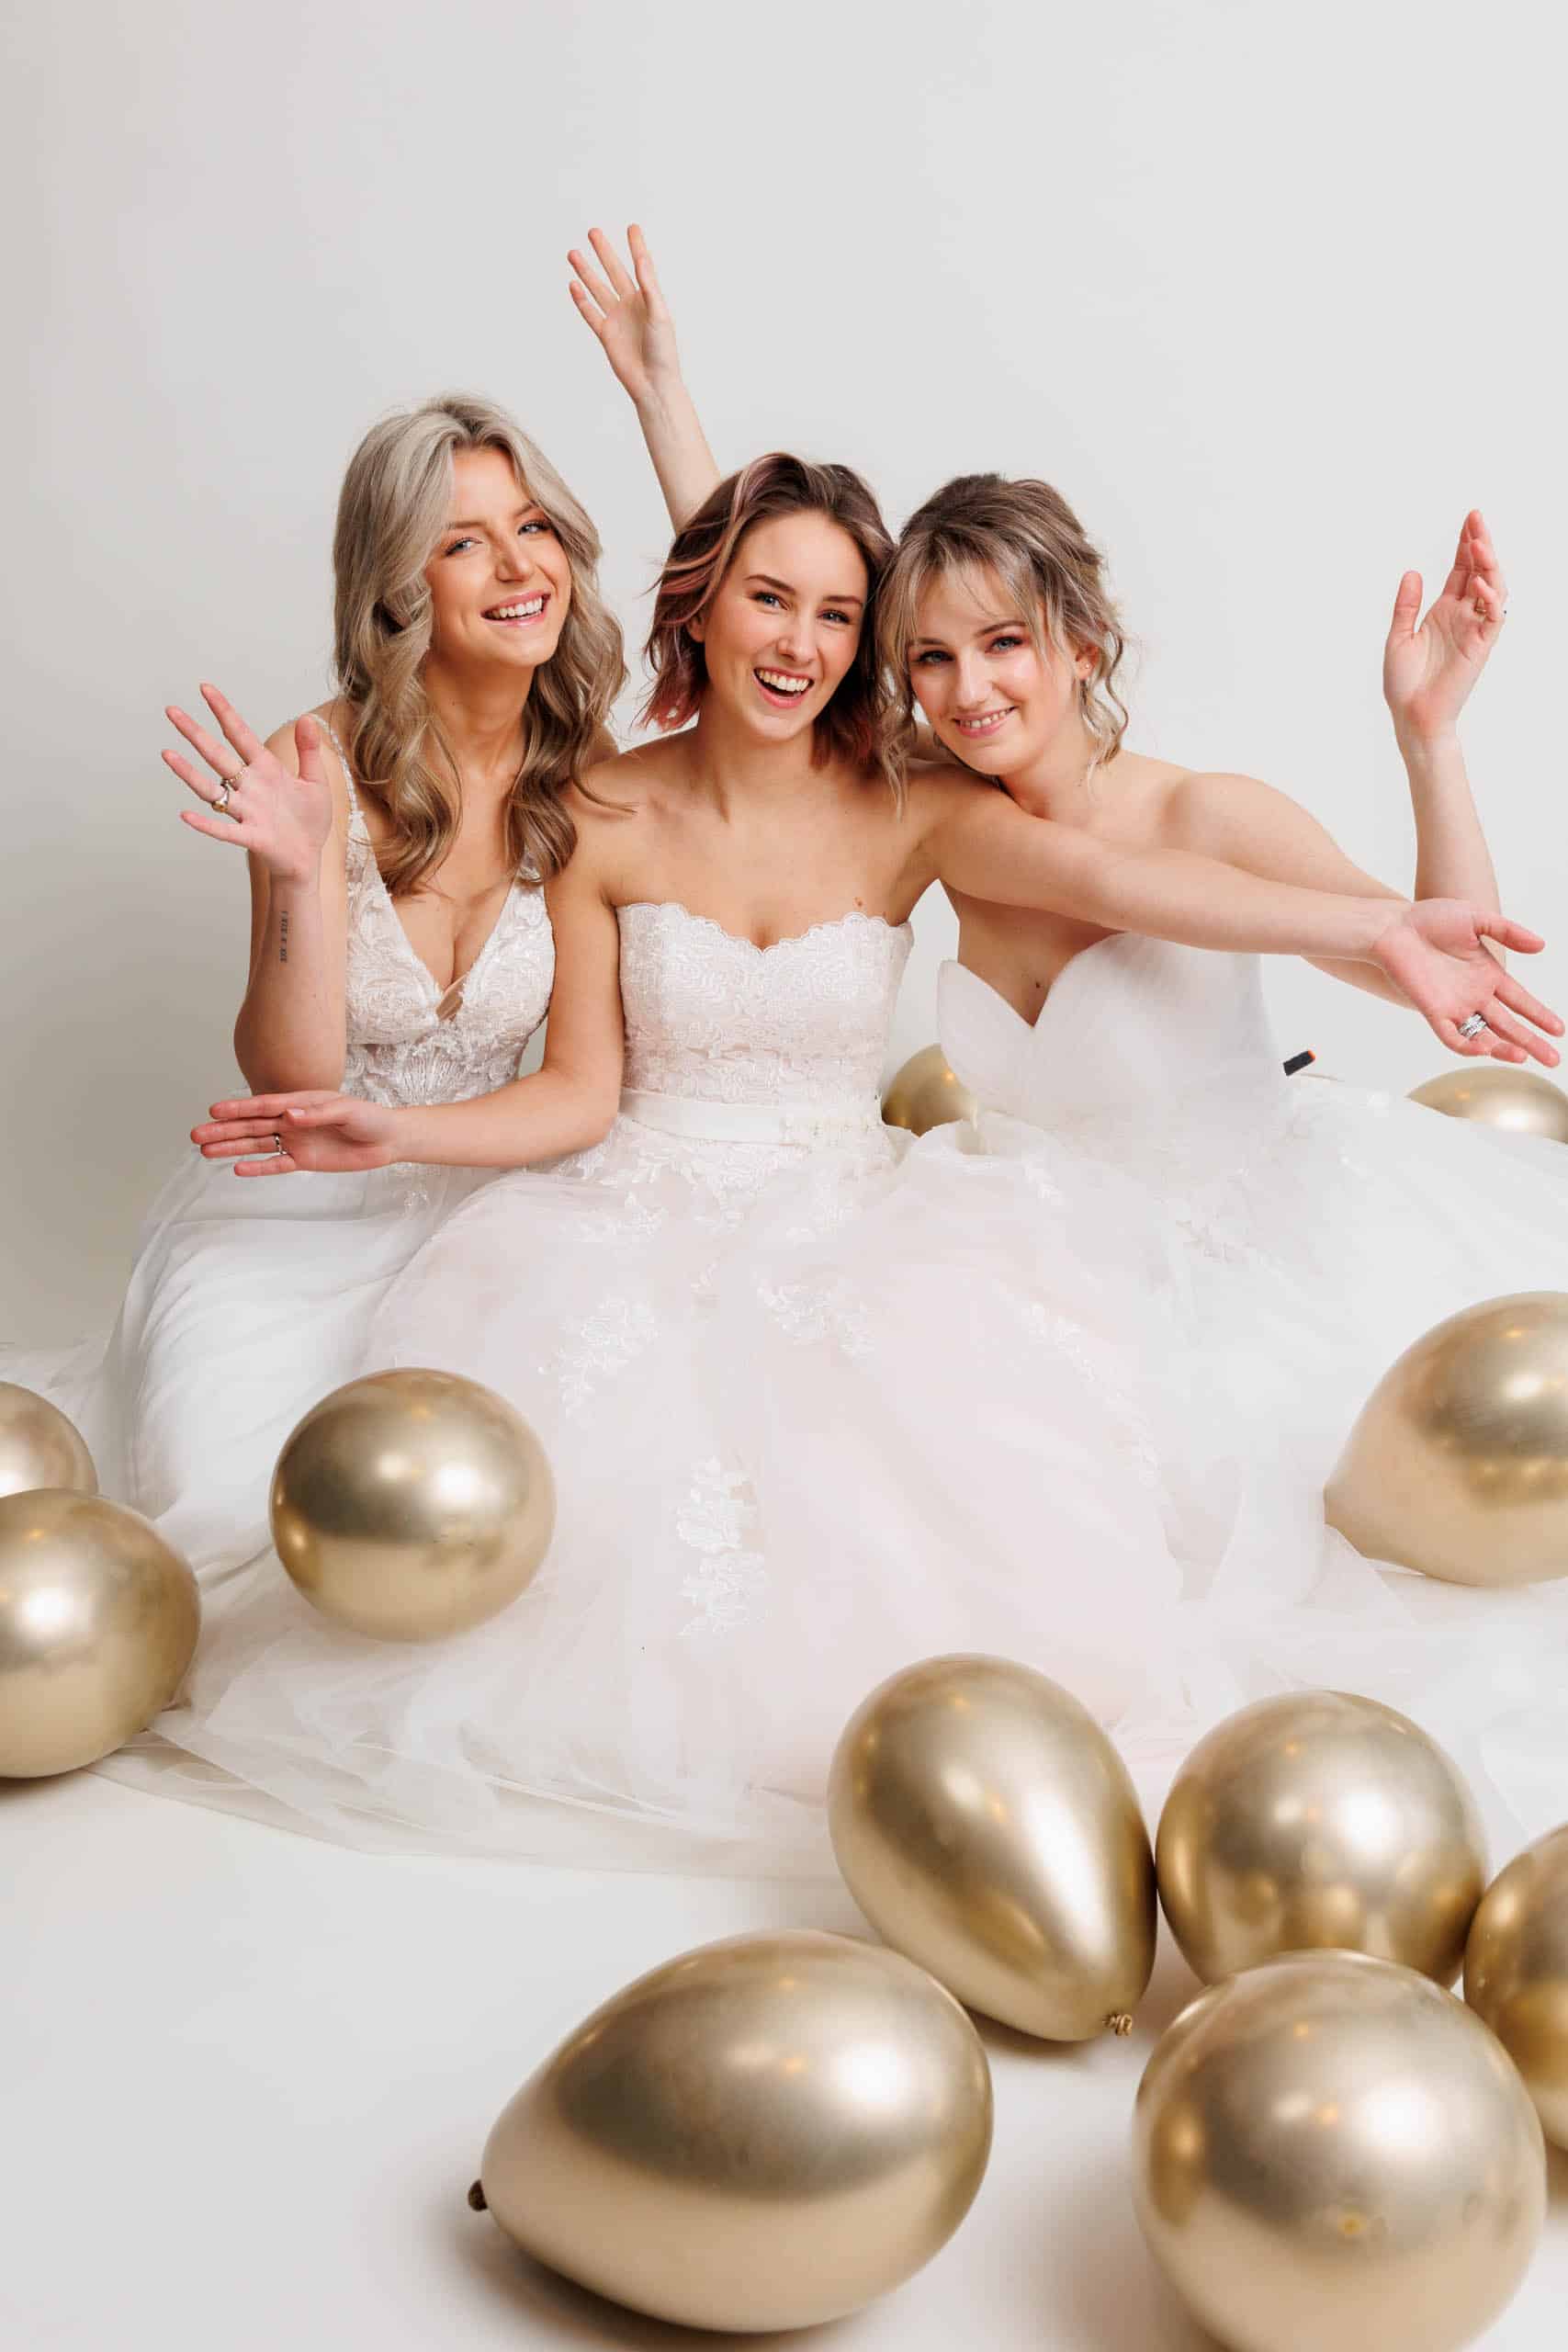 Three bridesmaids pose with gold balloons during their bachelorette party assignments.